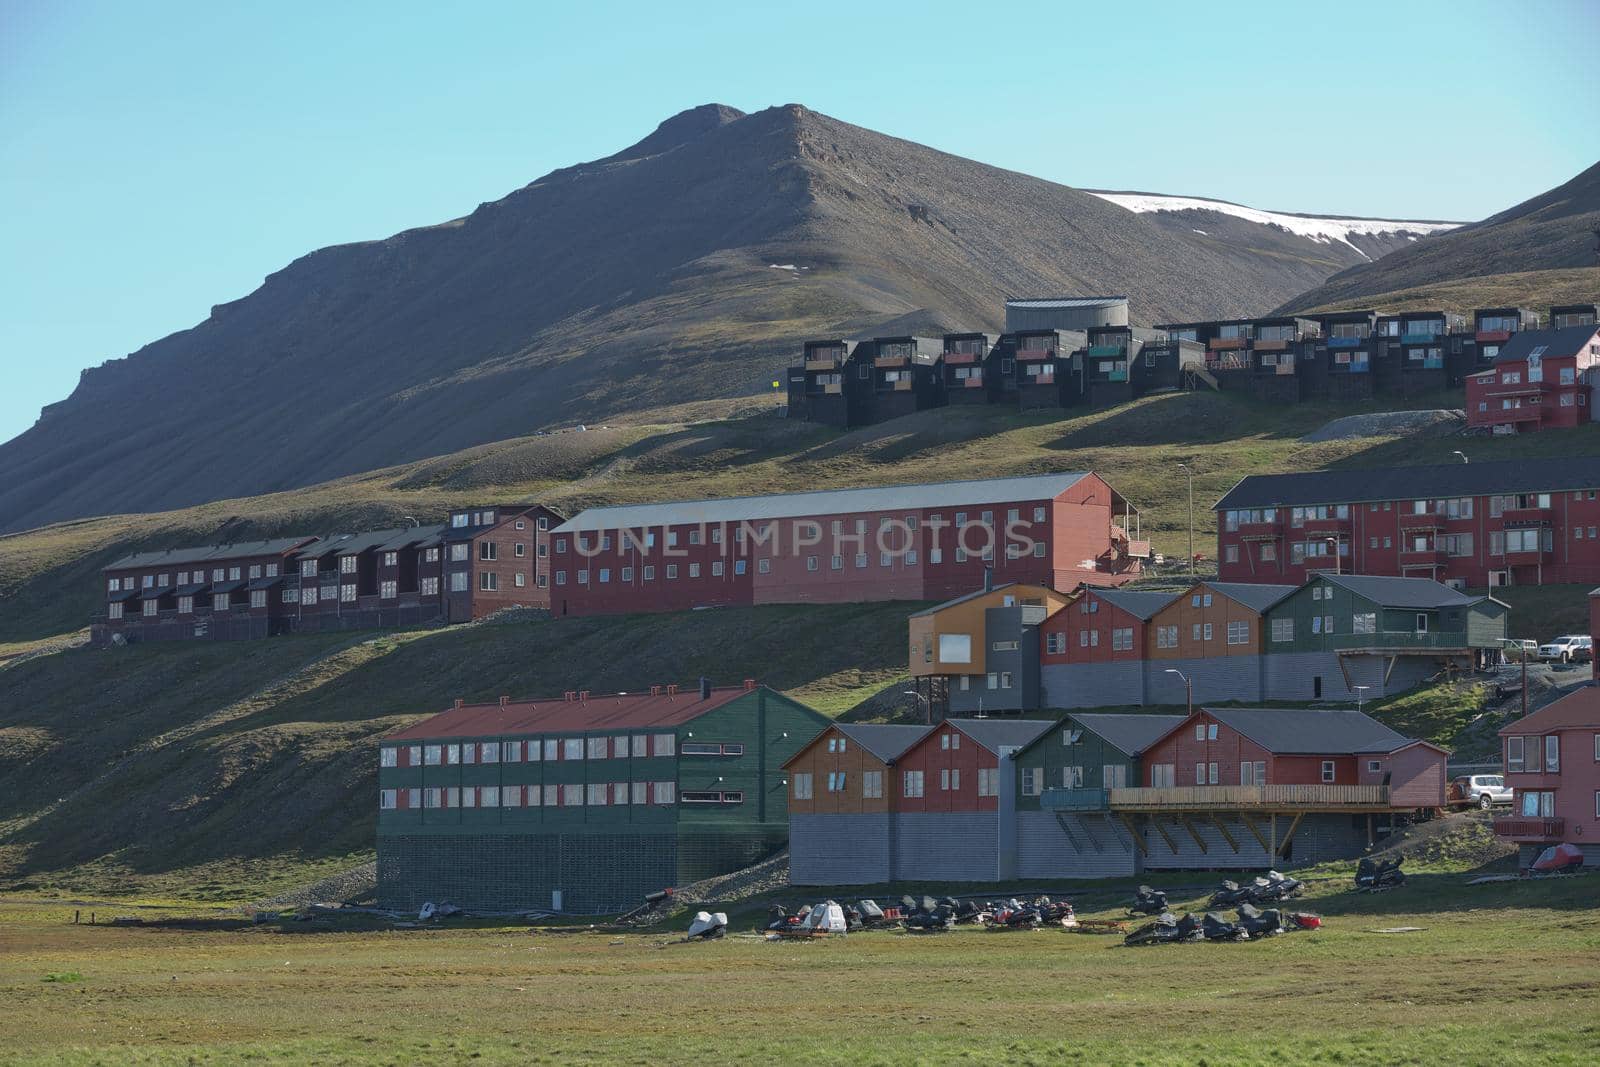 Traditional colorful wooden houses on a sunny day in Longyearbyen Svalbard by wondry